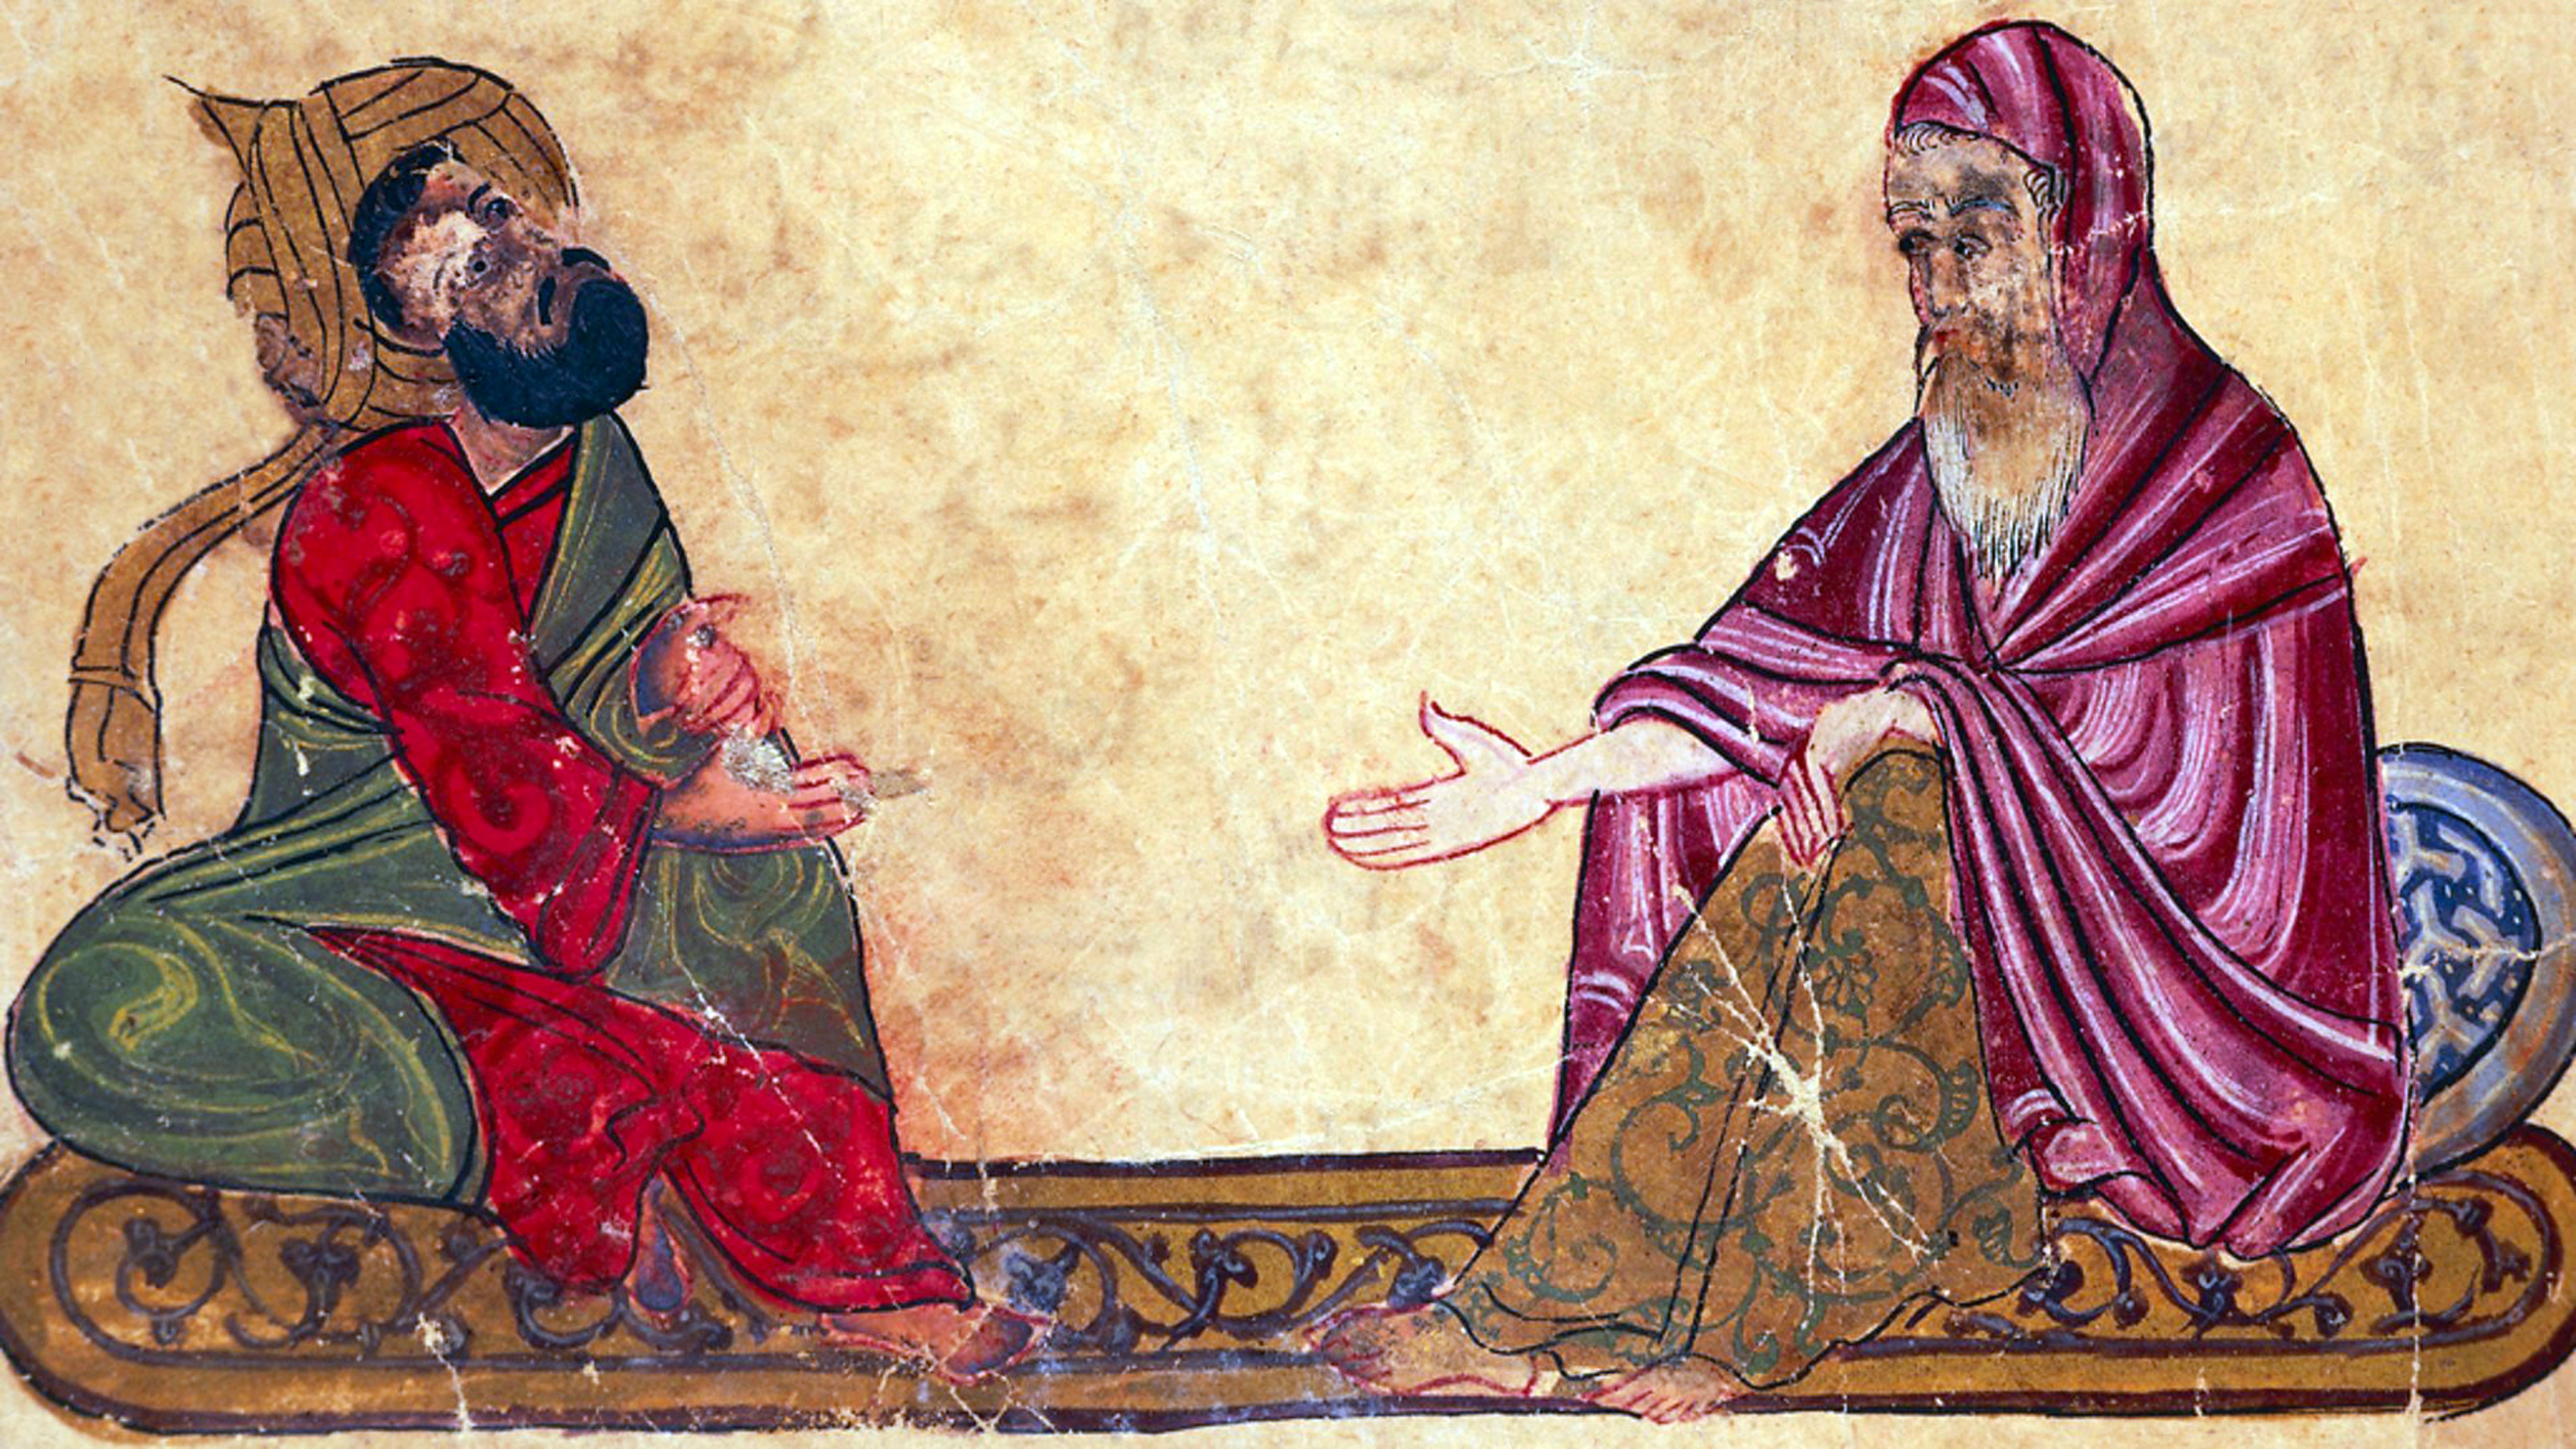 Turkey/Arabia: Two philosophers debating (to the right, possibly, Abu Yusuf al Kindi), ‘The best rulings and the most precious sayings of Al-Mubashshir’, 13th century CE